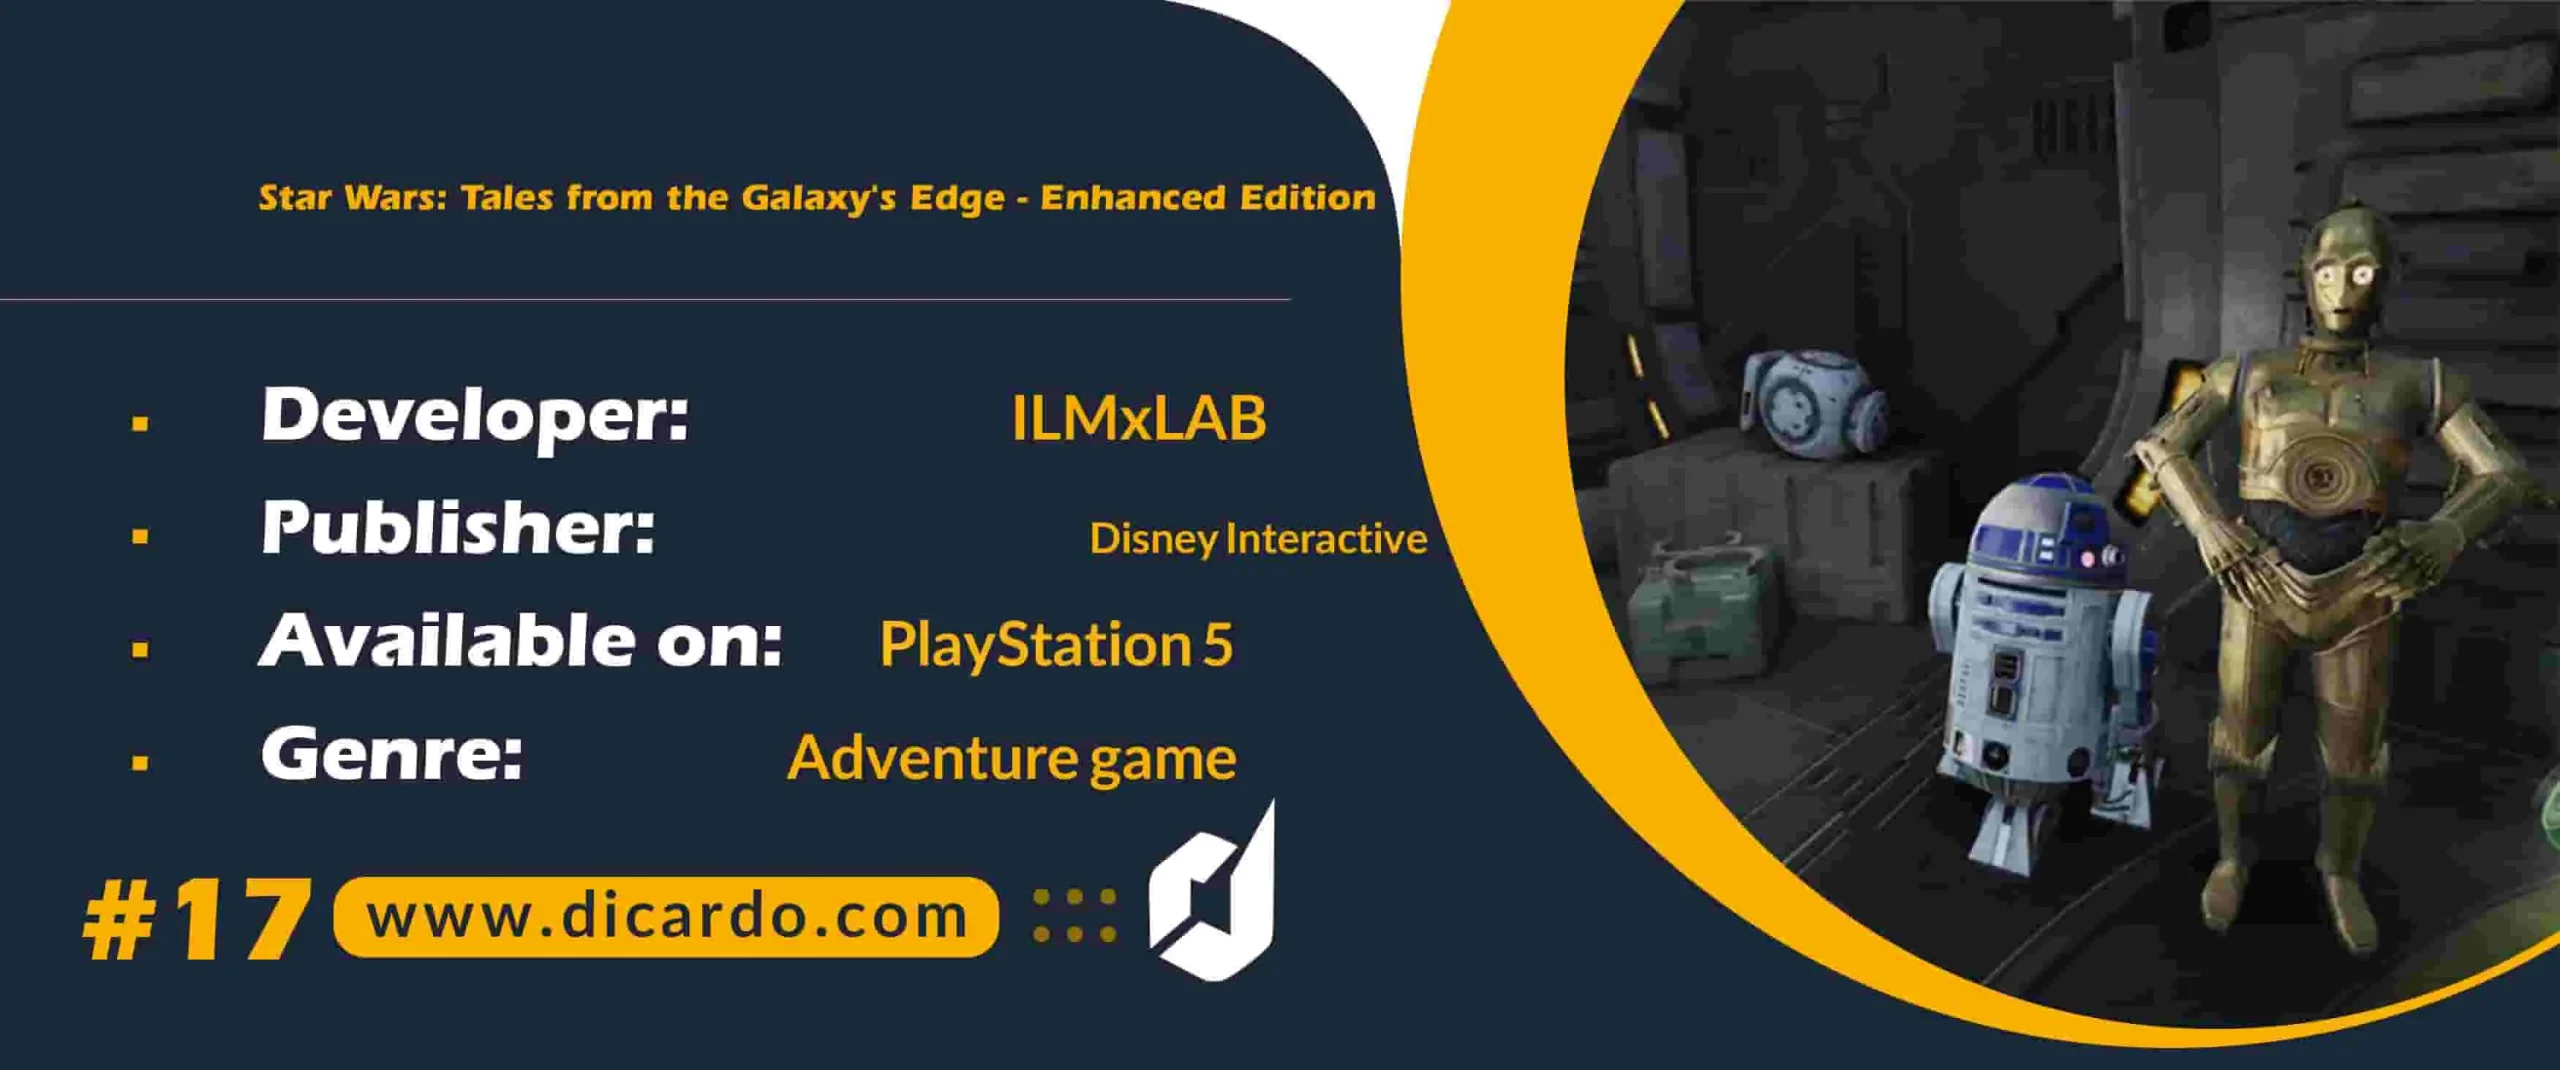 #17 Star Wars: Tales from the Galaxy's Edge - Enhanced Edition